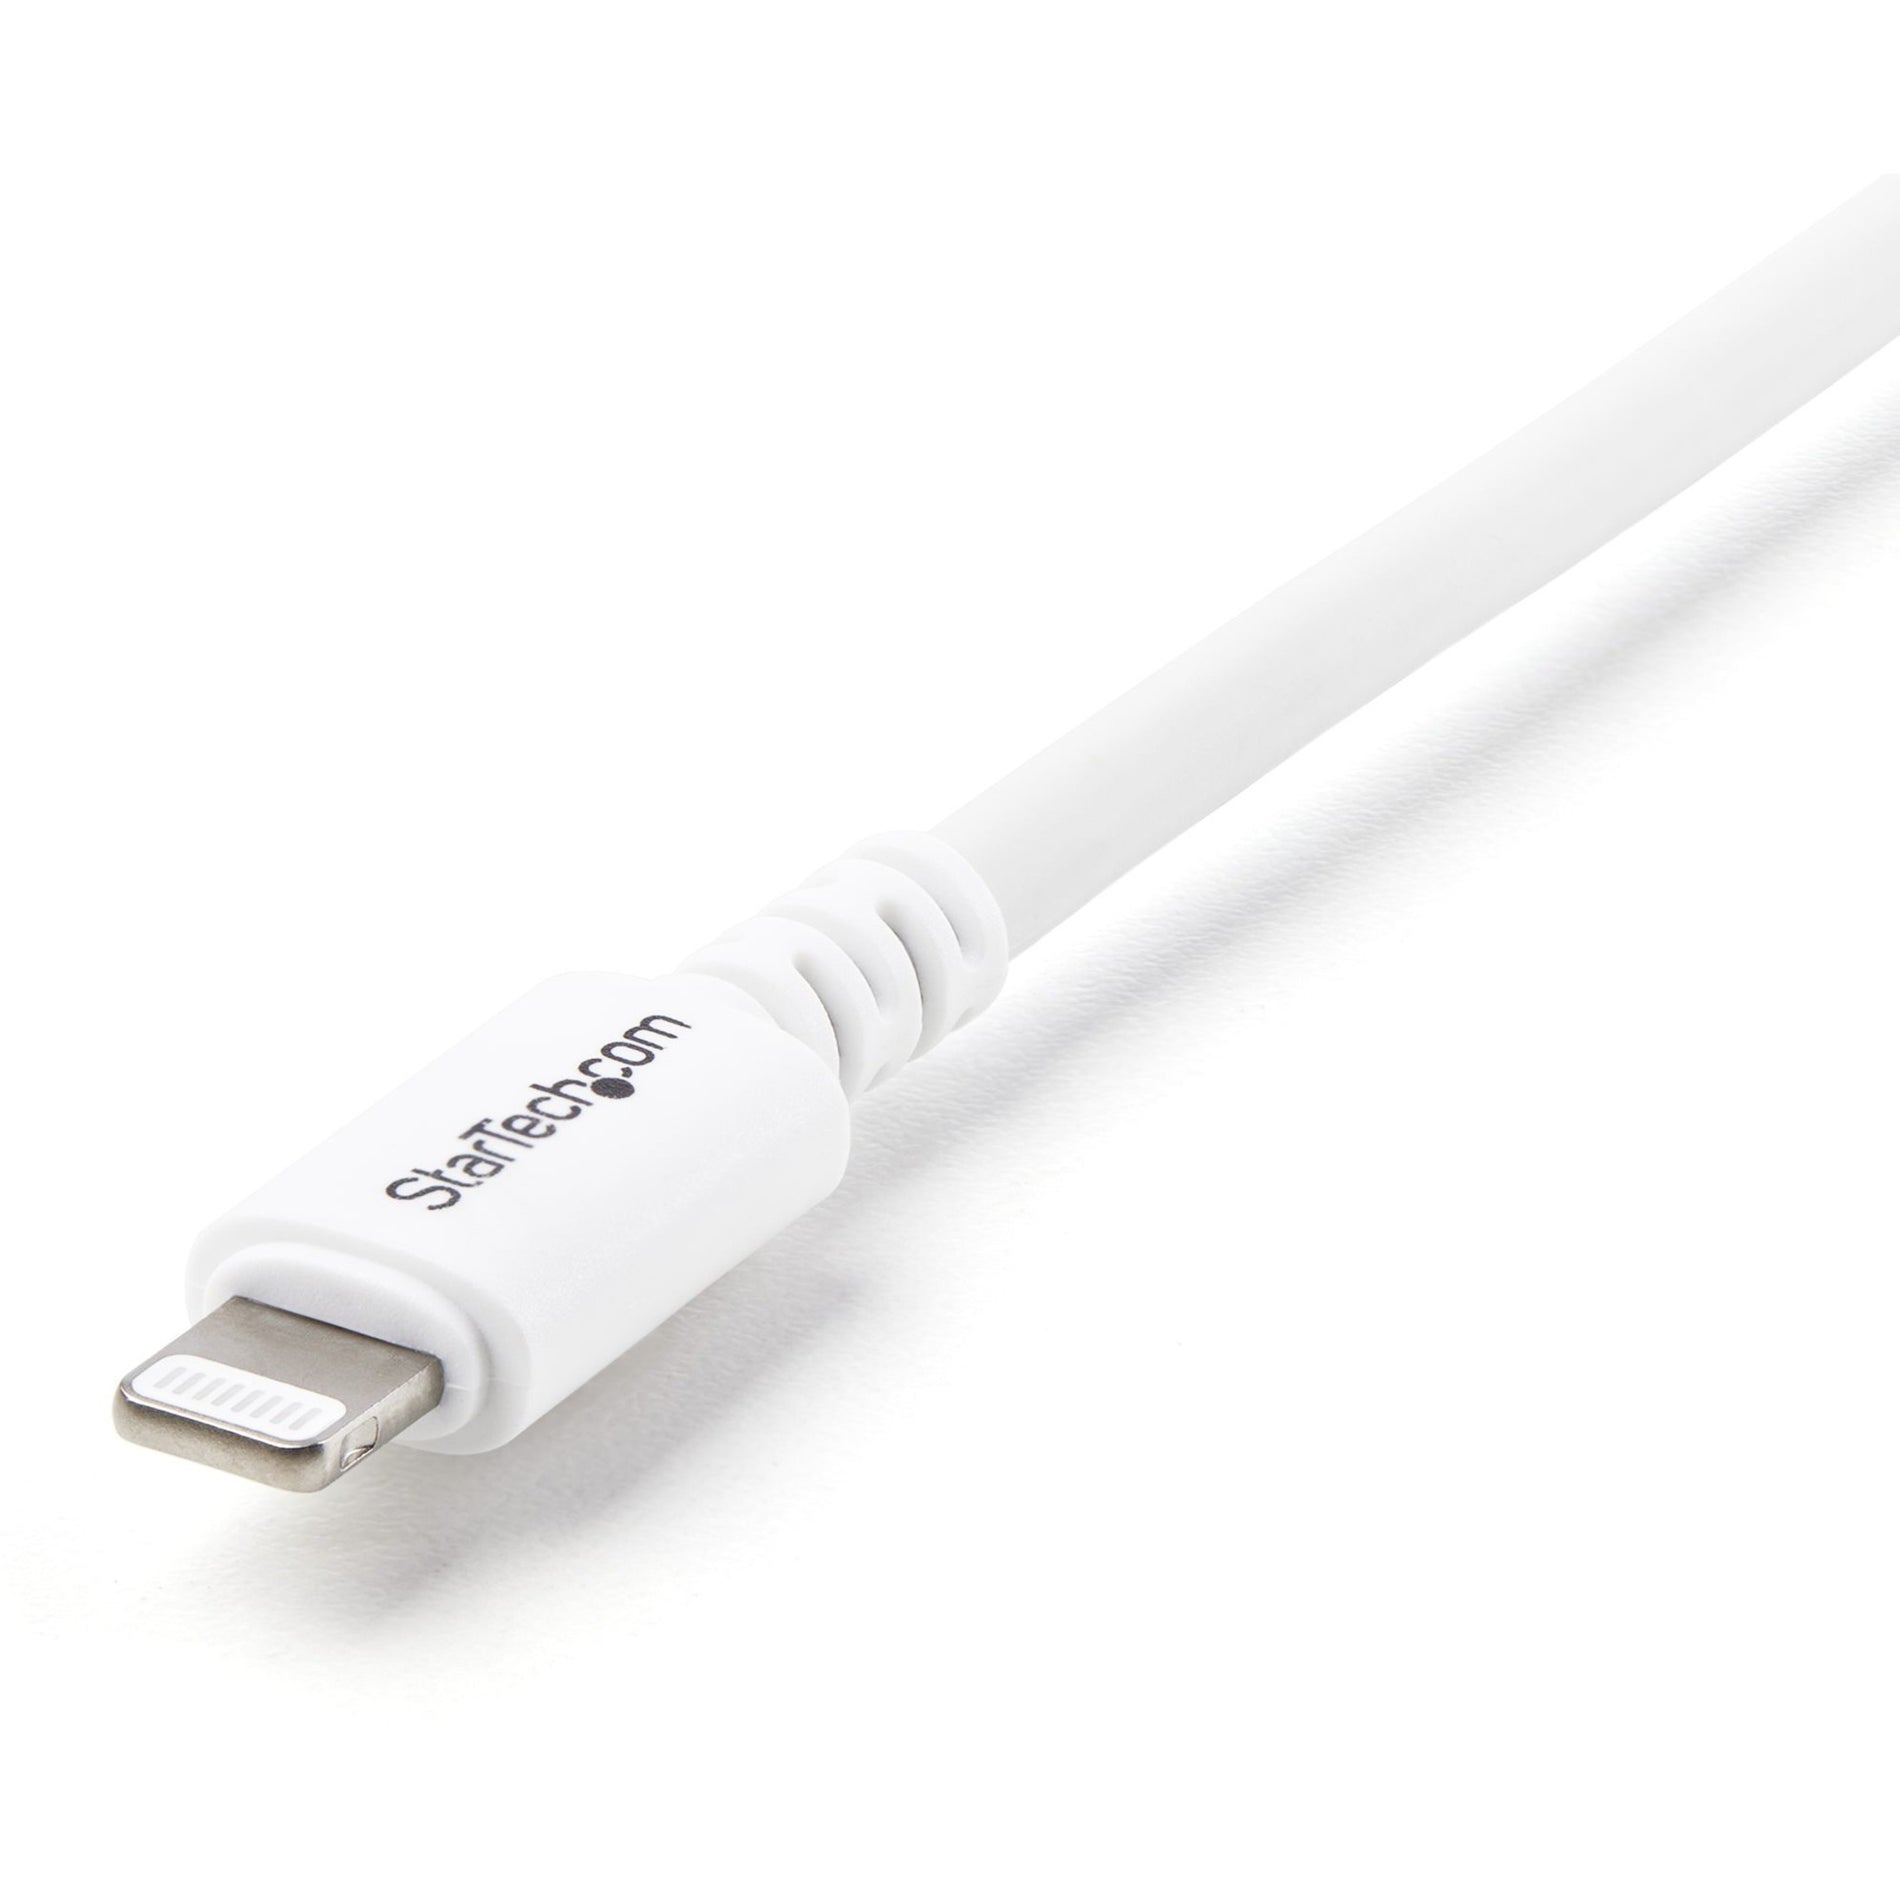 StarTech.com USBLT3MW Sync/Charge Lightning/USB Data Transfer Cable, 9.84 ft, MFI Certified, Reversible, Nickel Connector